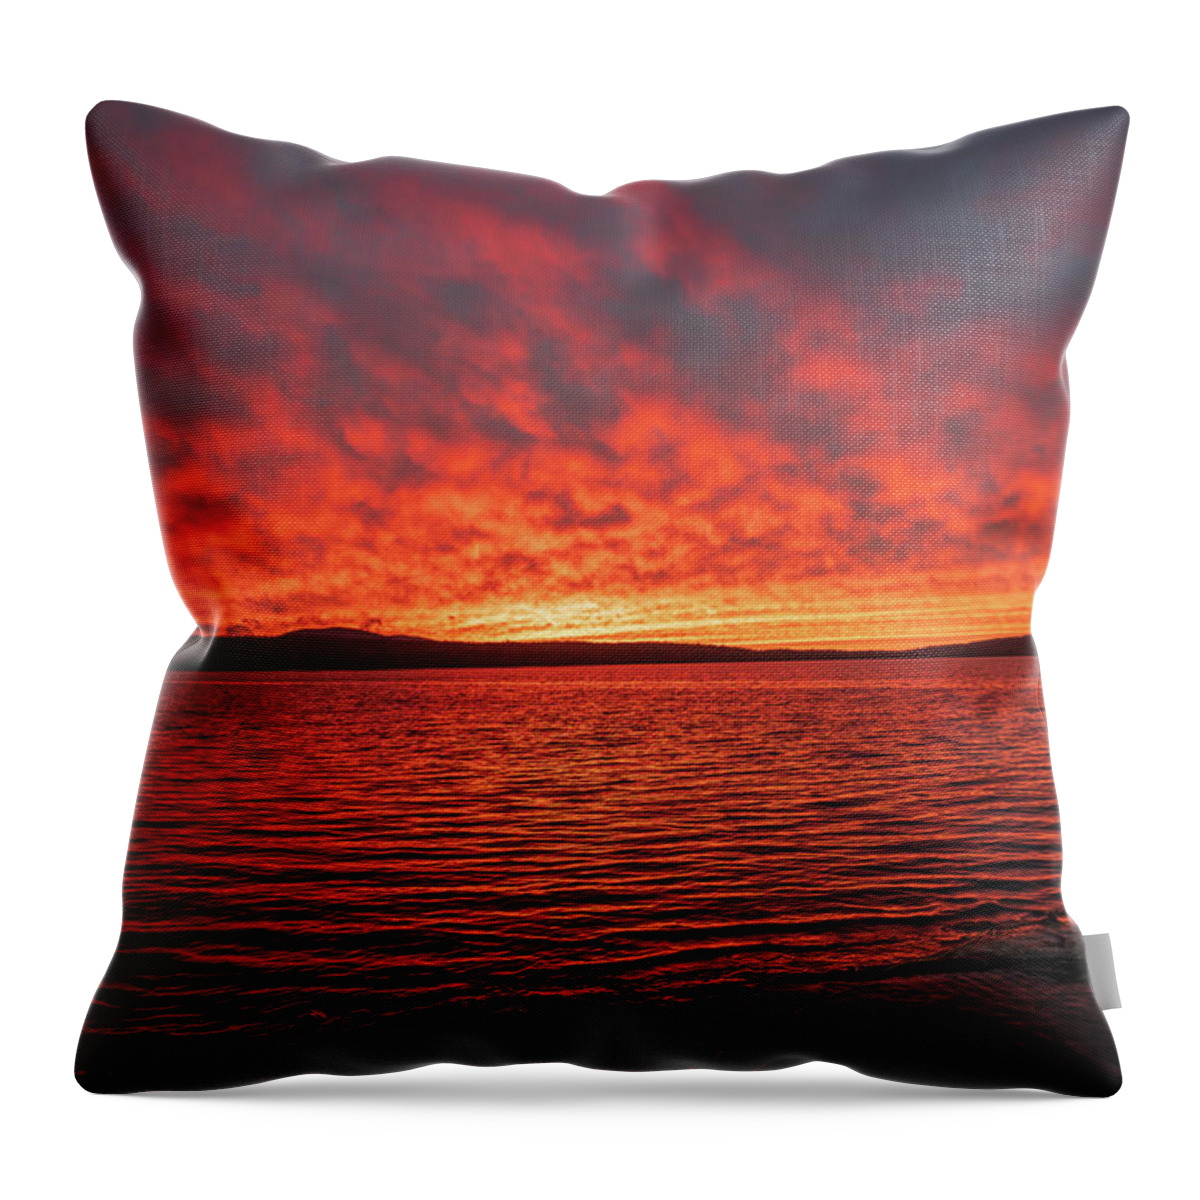 Fall Throw Pillow featuring the photograph Adirondacks Sunset at Tupper Lake by Ron Long Ltd Photography